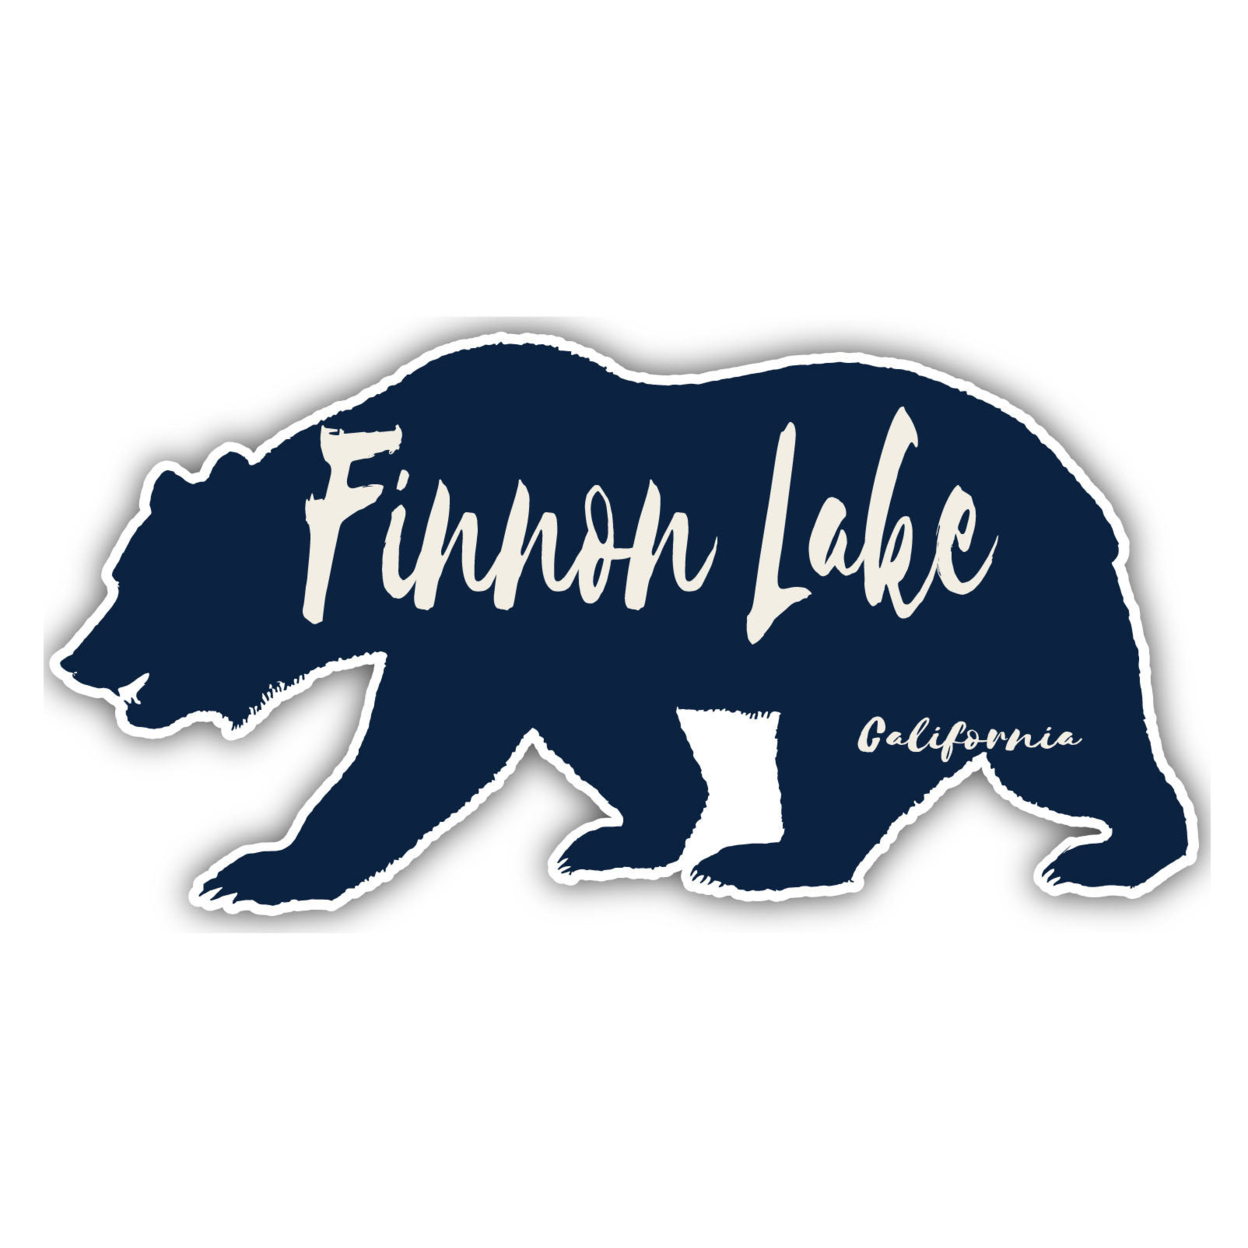 Finnon Lake California Souvenir Decorative Stickers (Choose Theme And Size) - 4-Pack, 6-Inch, Camp Life